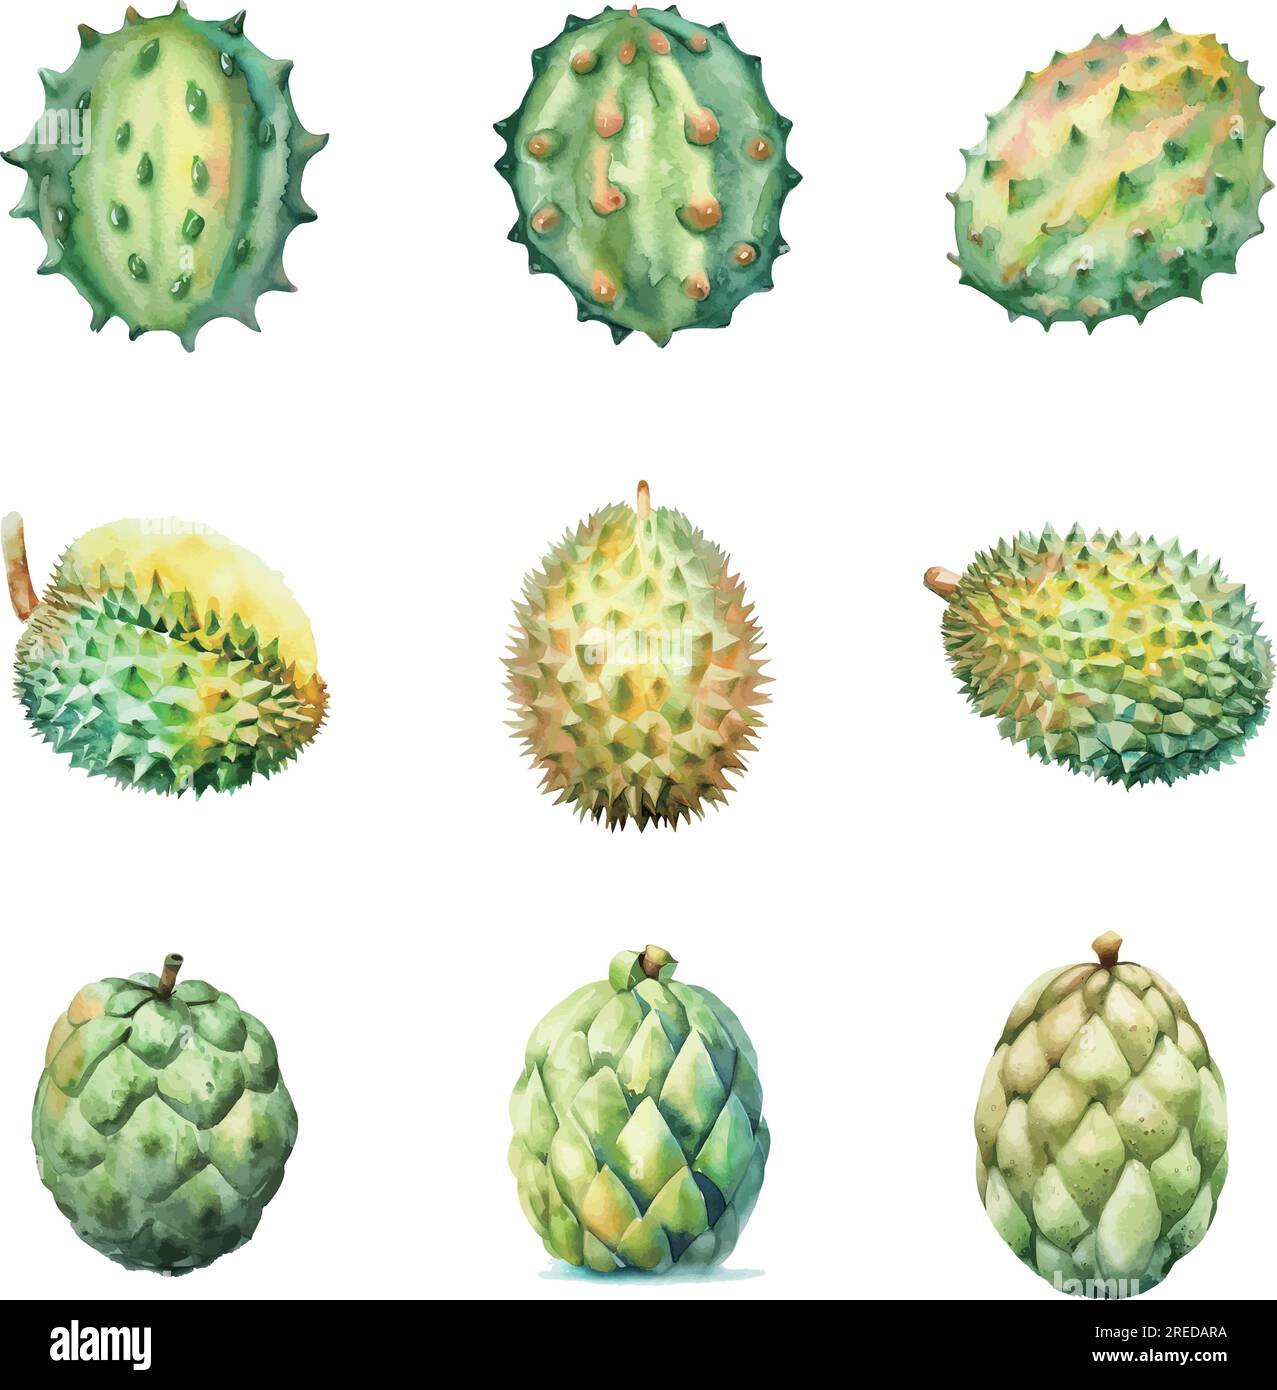 Silhouette Durian Vector Images (99)